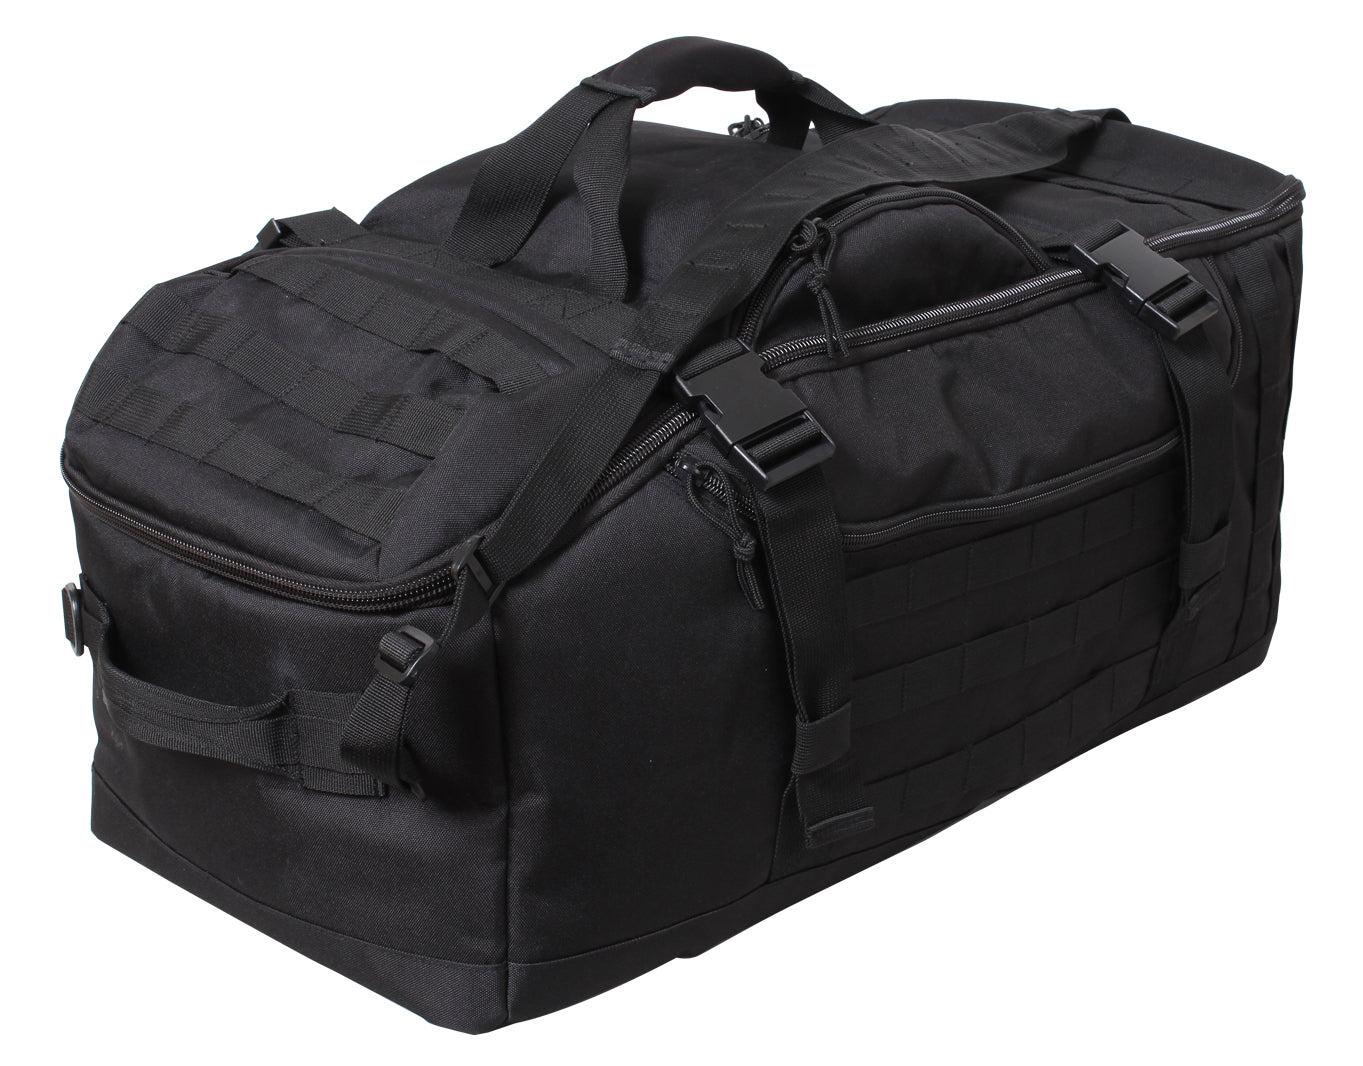 Rothco 3-In-1 Convertible Mission Travel Duffle Bag Backpack